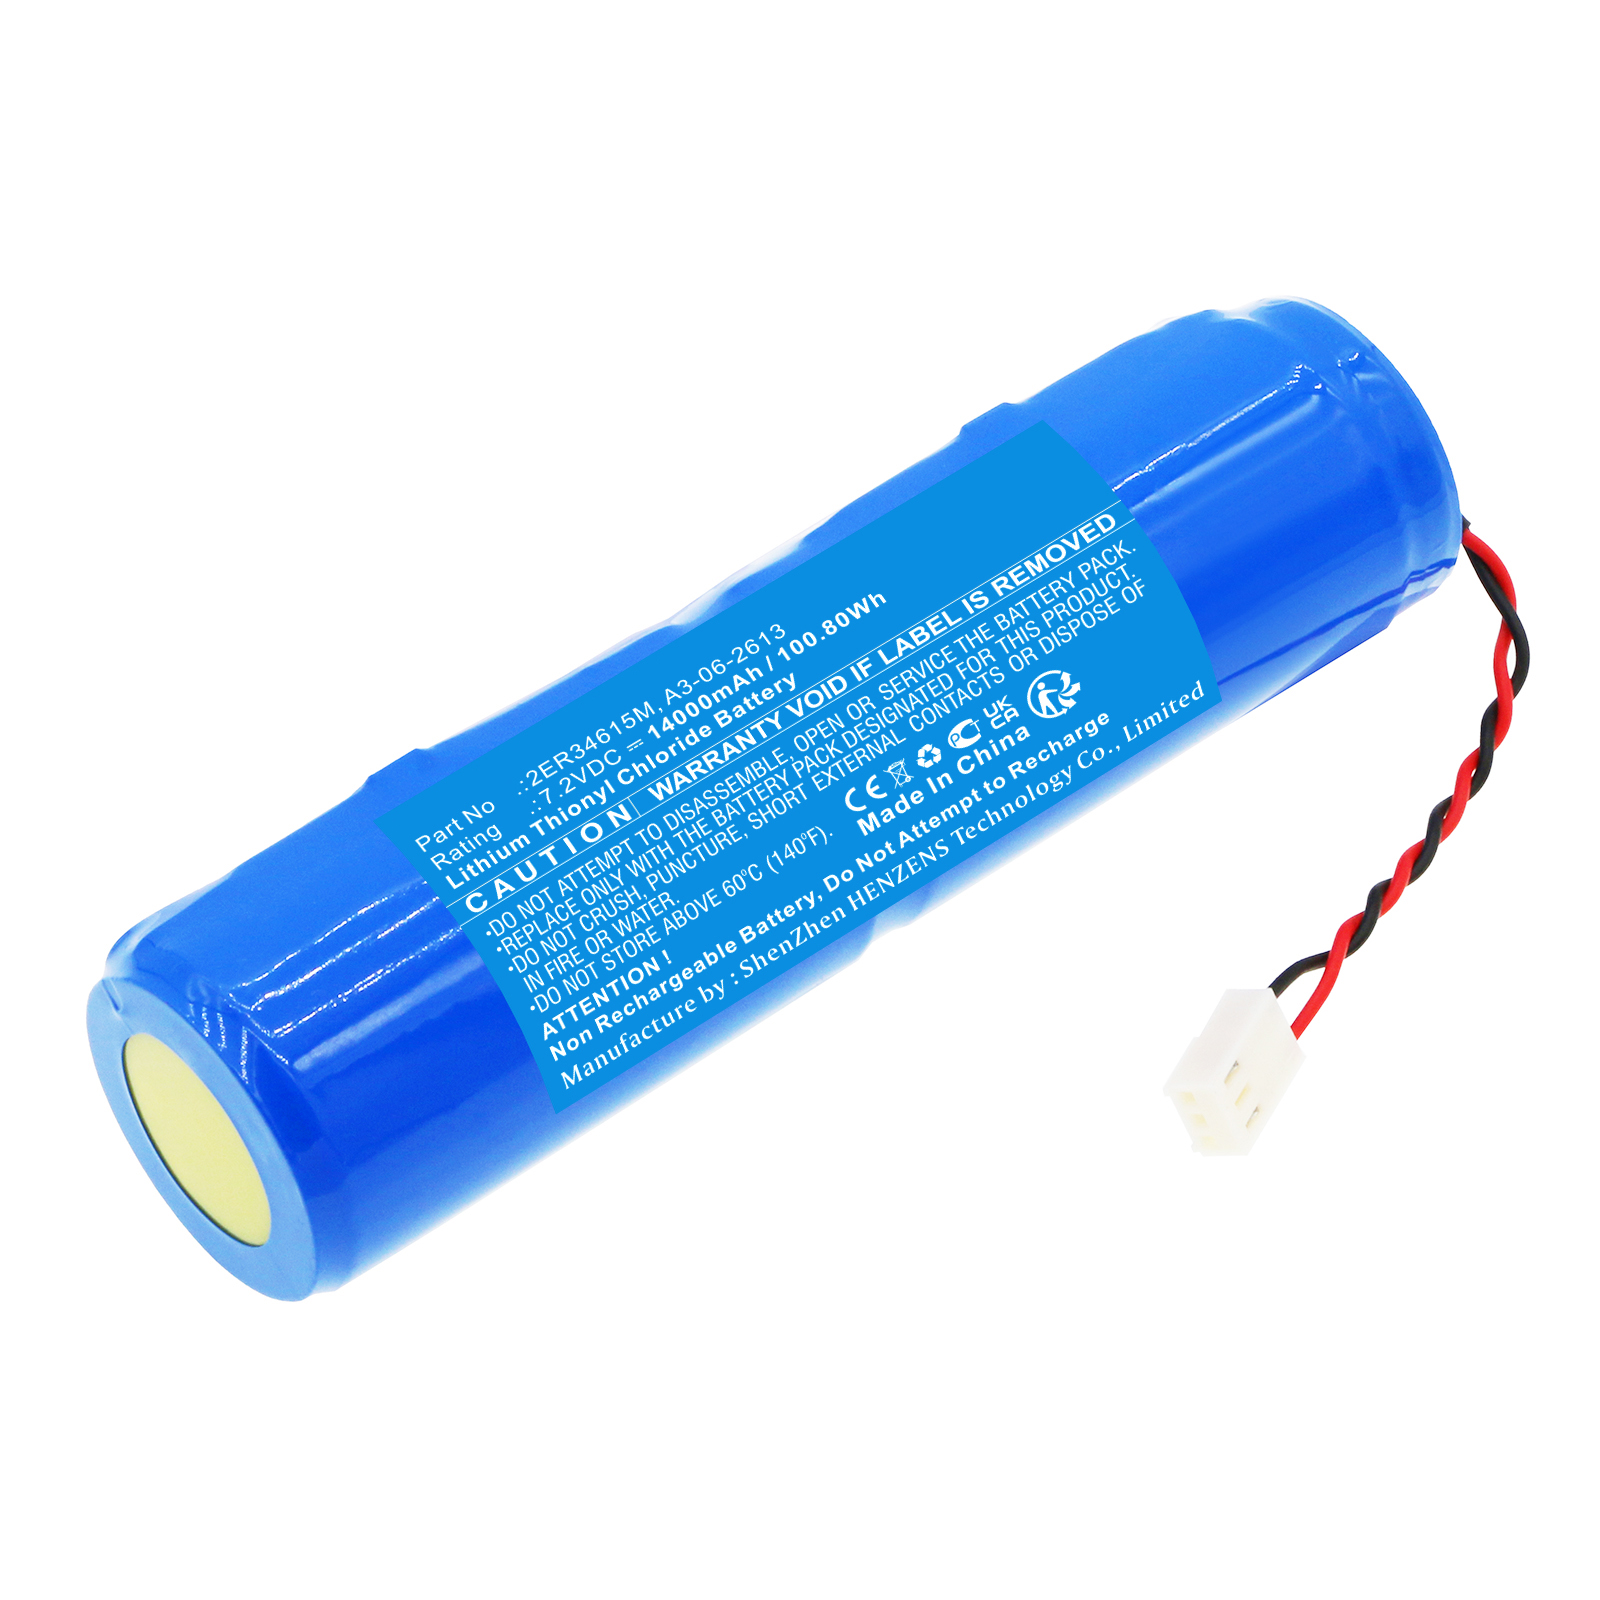 Synergy Digital Marine Safety & Flotation Devices Battery, Compatible with Radio Beacon 2ER34615M Marine Safety & Flotation Devices Battery (Li-SOCl2, 7.2V, 14000mAh)